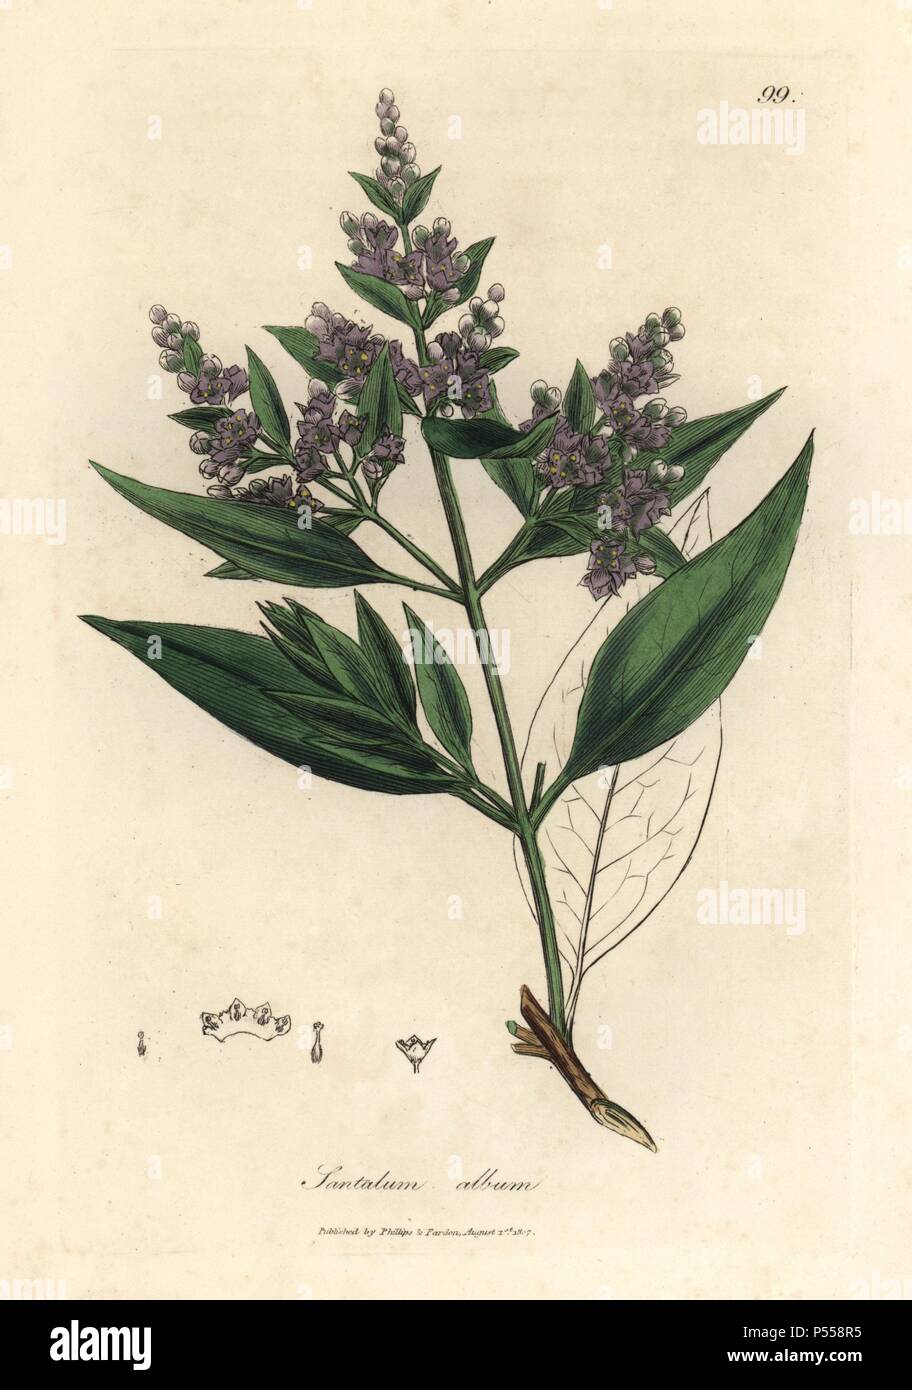 Indian sandalwood, Santalum album. Vulnerable. Handcoloured copperplate engraving from a botanical illustration by James Sowerby from William Woodville and Sir William Jackson Hooker's 'Medical Botany,' John Bohn, London, 1832. The tireless Sowerby (1757-1822) drew over 2, 500 plants for Smith's mammoth 'English Botany' (1790-1814) and 440 mushrooms for 'Coloured Figures of English Fungi ' (1797) among many other works. Stock Photo